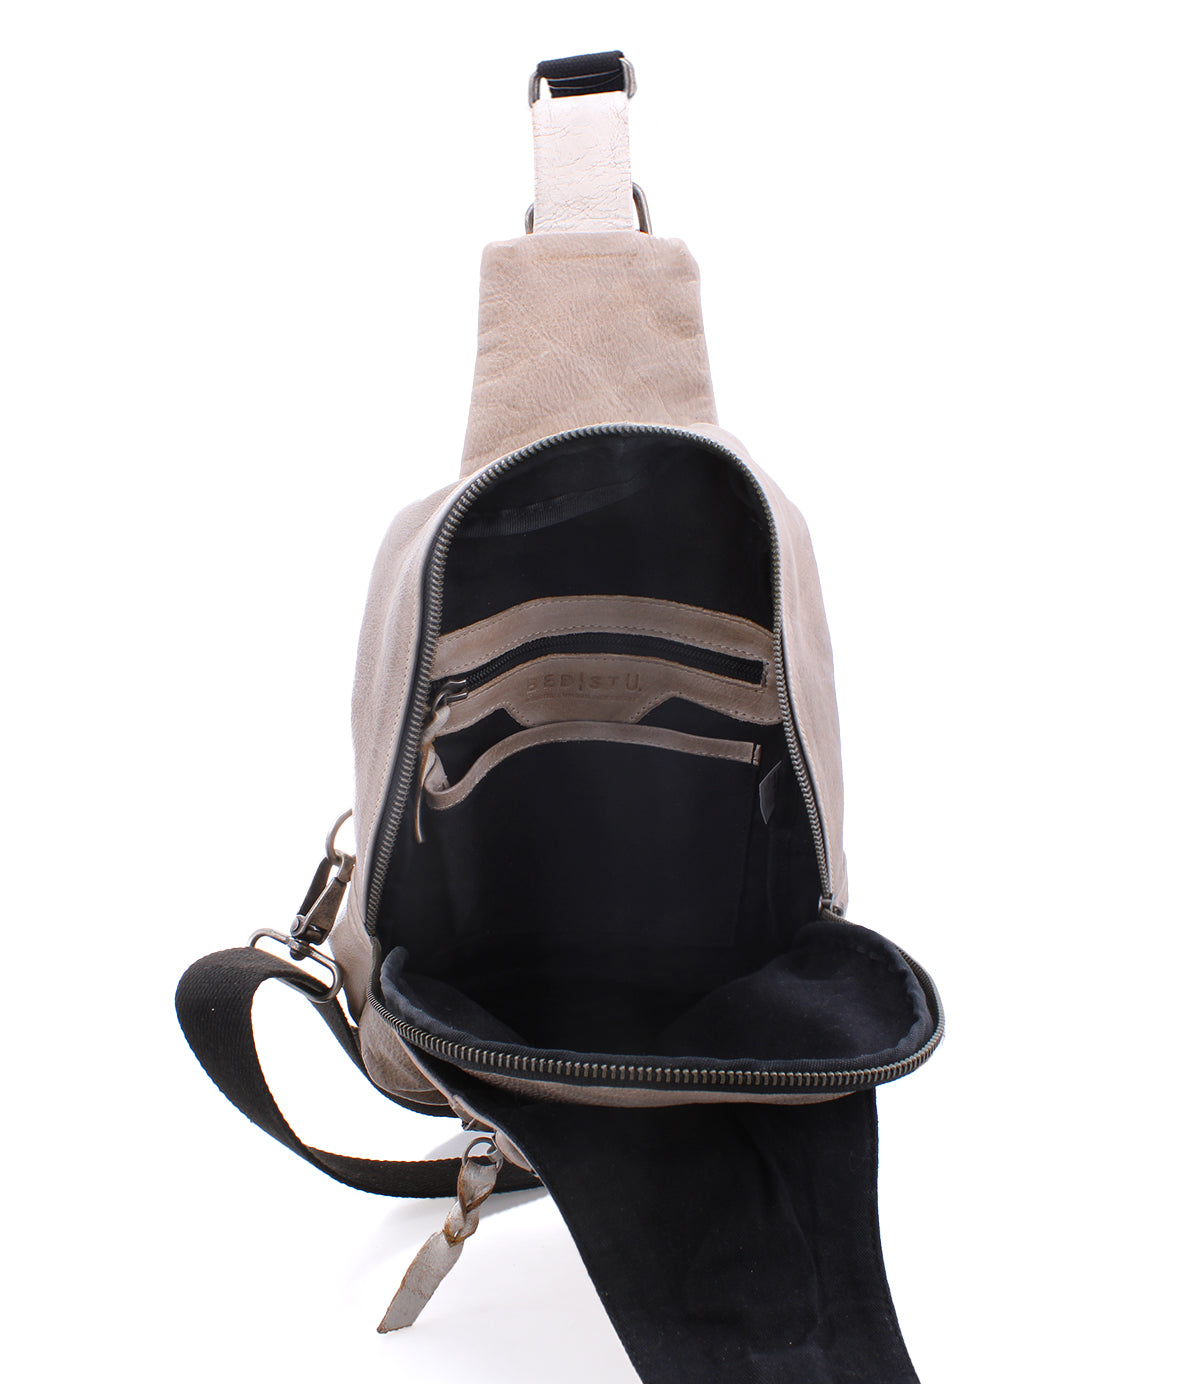 A durable leather Beau sling bag by Bed Stu on a white background, perfect for hands-free activities.